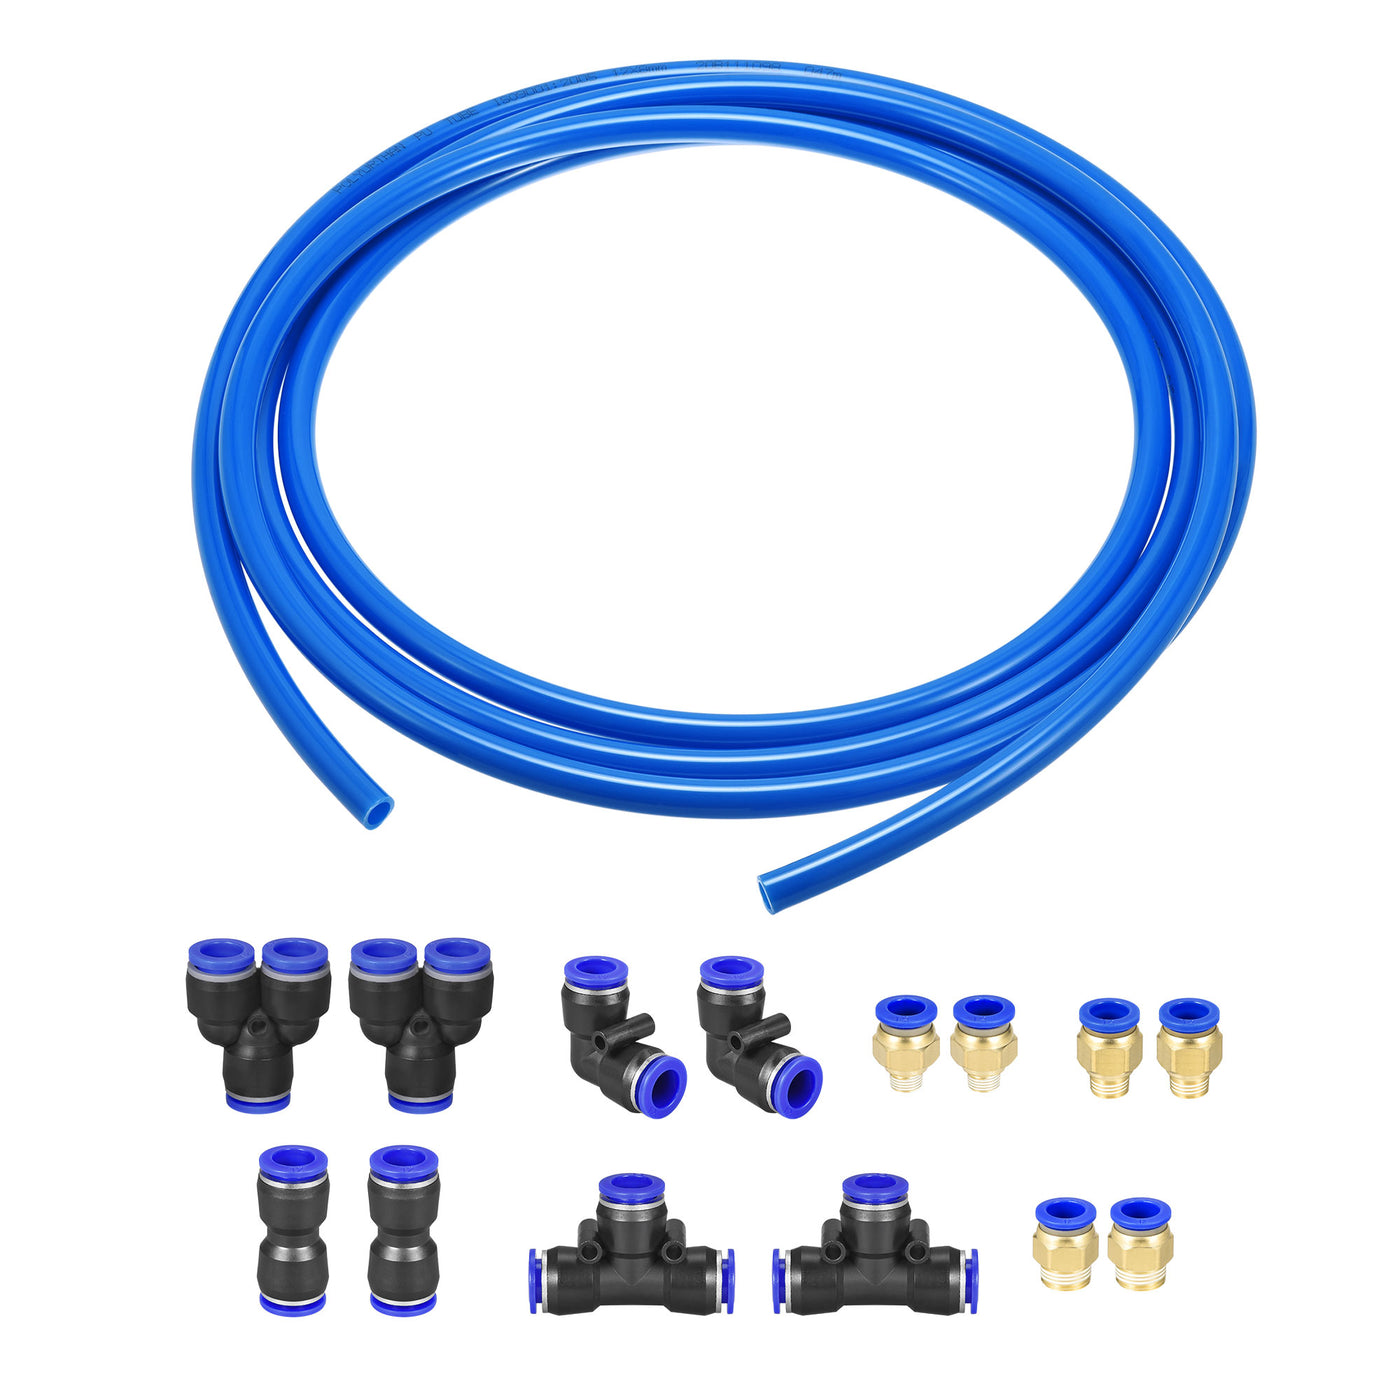 uxcell Uxcell Pneumatic Air Hose Tubing PU Air Compressor Tube 8mm/0.3''ID x 12mm/0.5''OD x 10m/32.8Ft Polyurethane Pipe Blue with 7 Type Connect Fittings